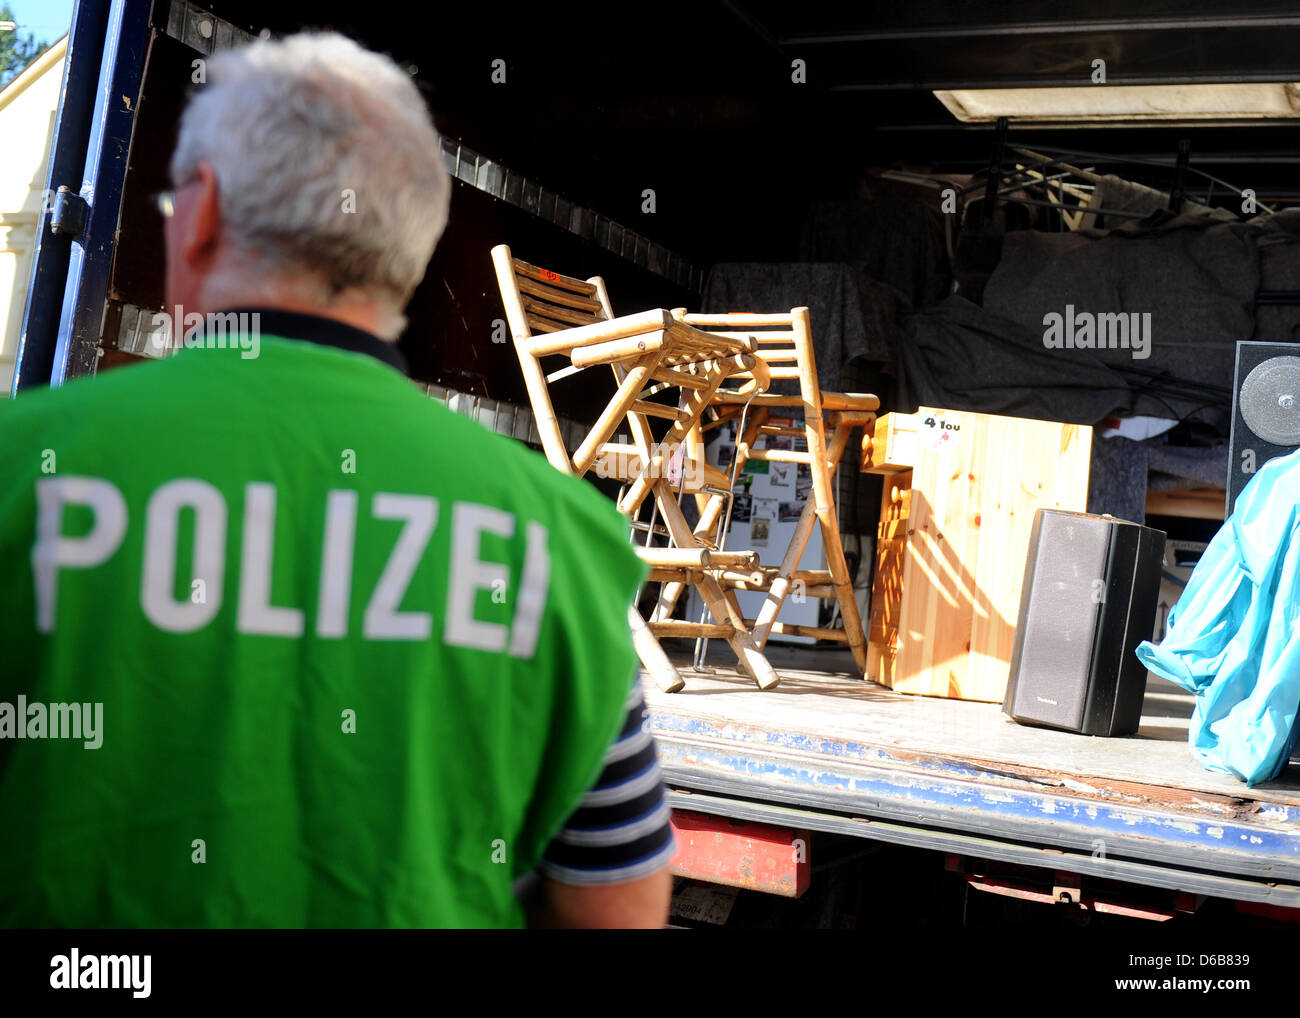 A police officer guards a lorry filled with objects that were seized during a house search in Dortmund, Germany, 23 August 2012. Police were out in force after the North Rhine-Westphalian Interior Minister outlawed three right-wing extremist organizations, the 'Kameradschaft Aachener Land', the 'Nationaler Widerstand Dortmund' and the 'Kameradschaft Hamm'. Photo: CAROLINE SEIDEL Stock Photo